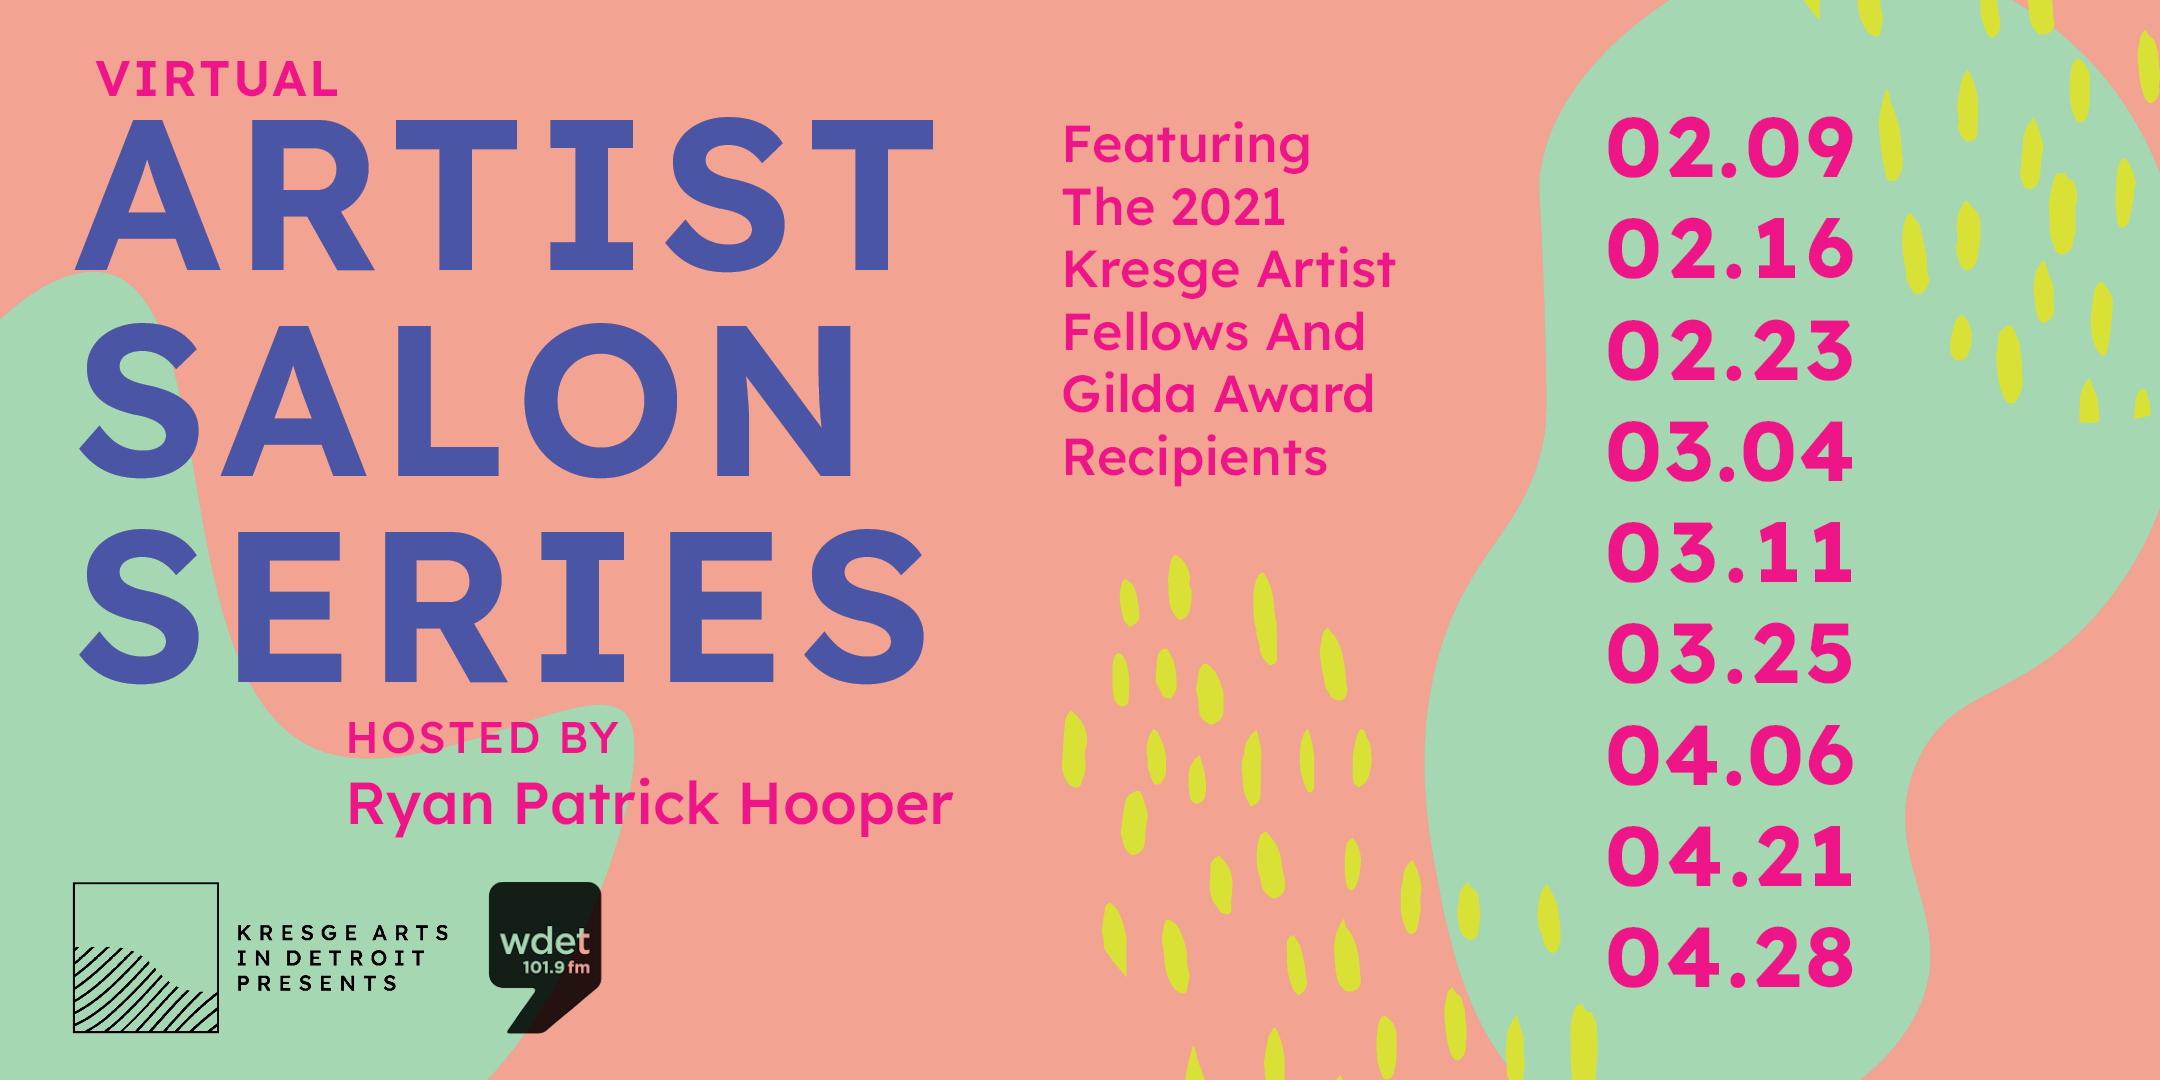 A coral and mint background with fields of yellow spots that reads Virtual Artist Salon Series Featuring the 2021 Kresge Artist Fellows and Gilda Award Recipients. The dates of the nine events in the series are listed on the right side.